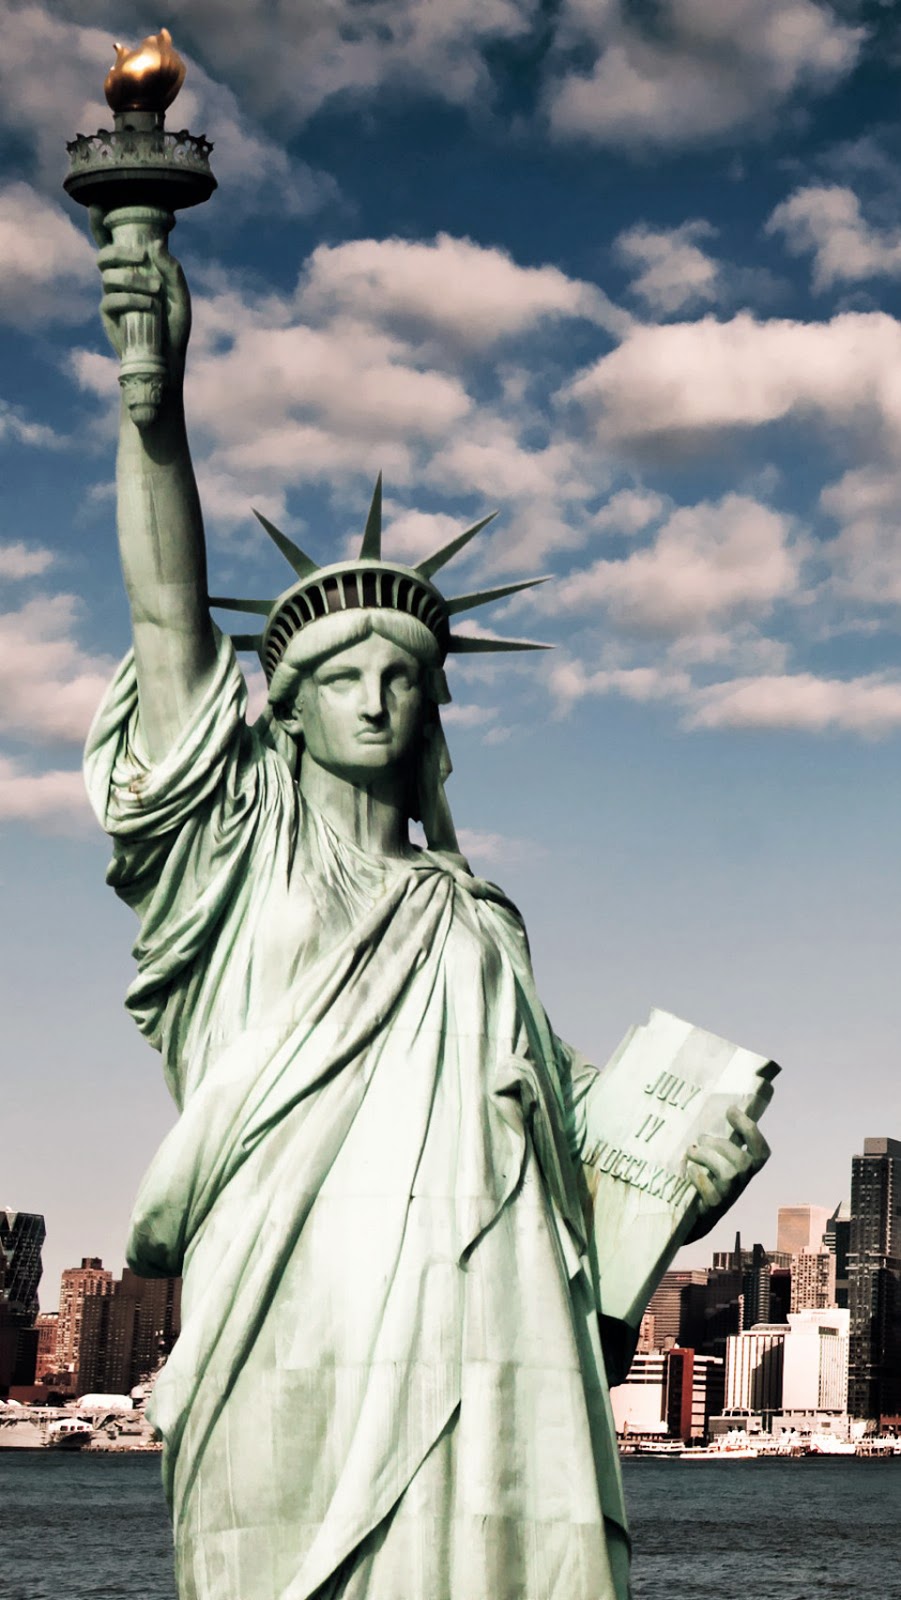 Spend Unforgettable Time in New York-Statue of Liberty